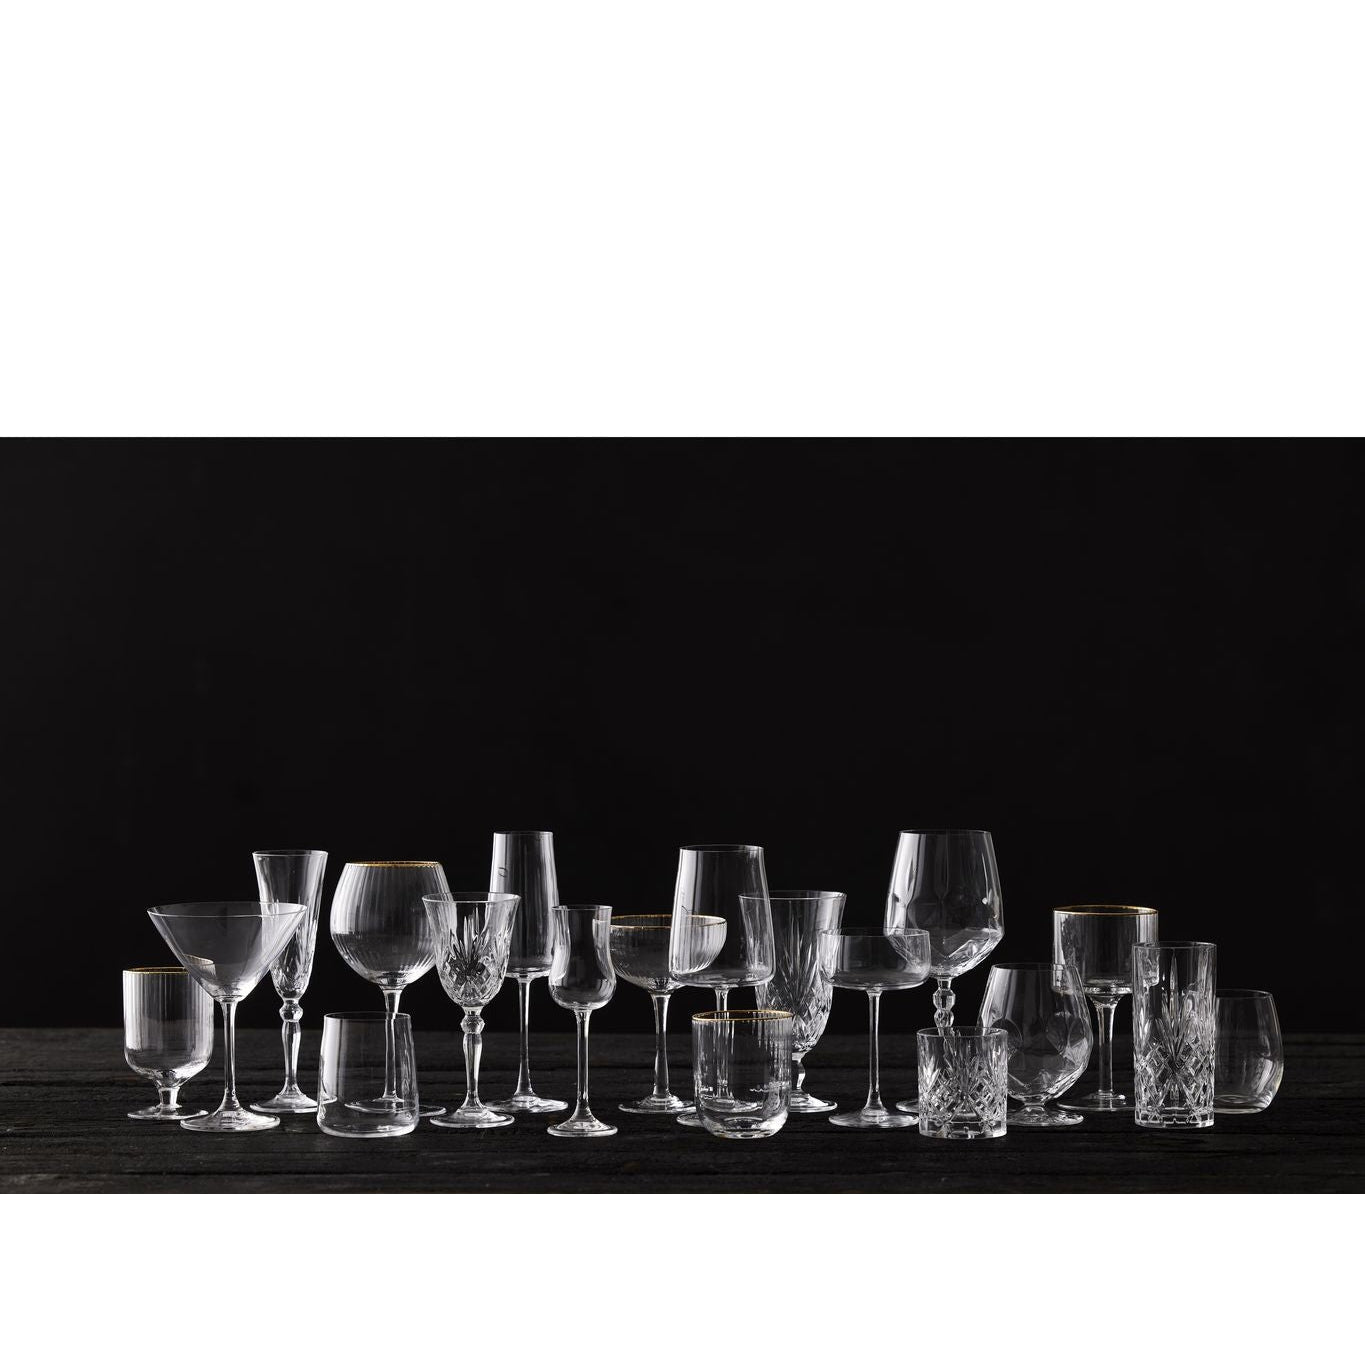 Lyngby Glas Palermo Gold Weinglas 30 Cl, 4 Stcs.